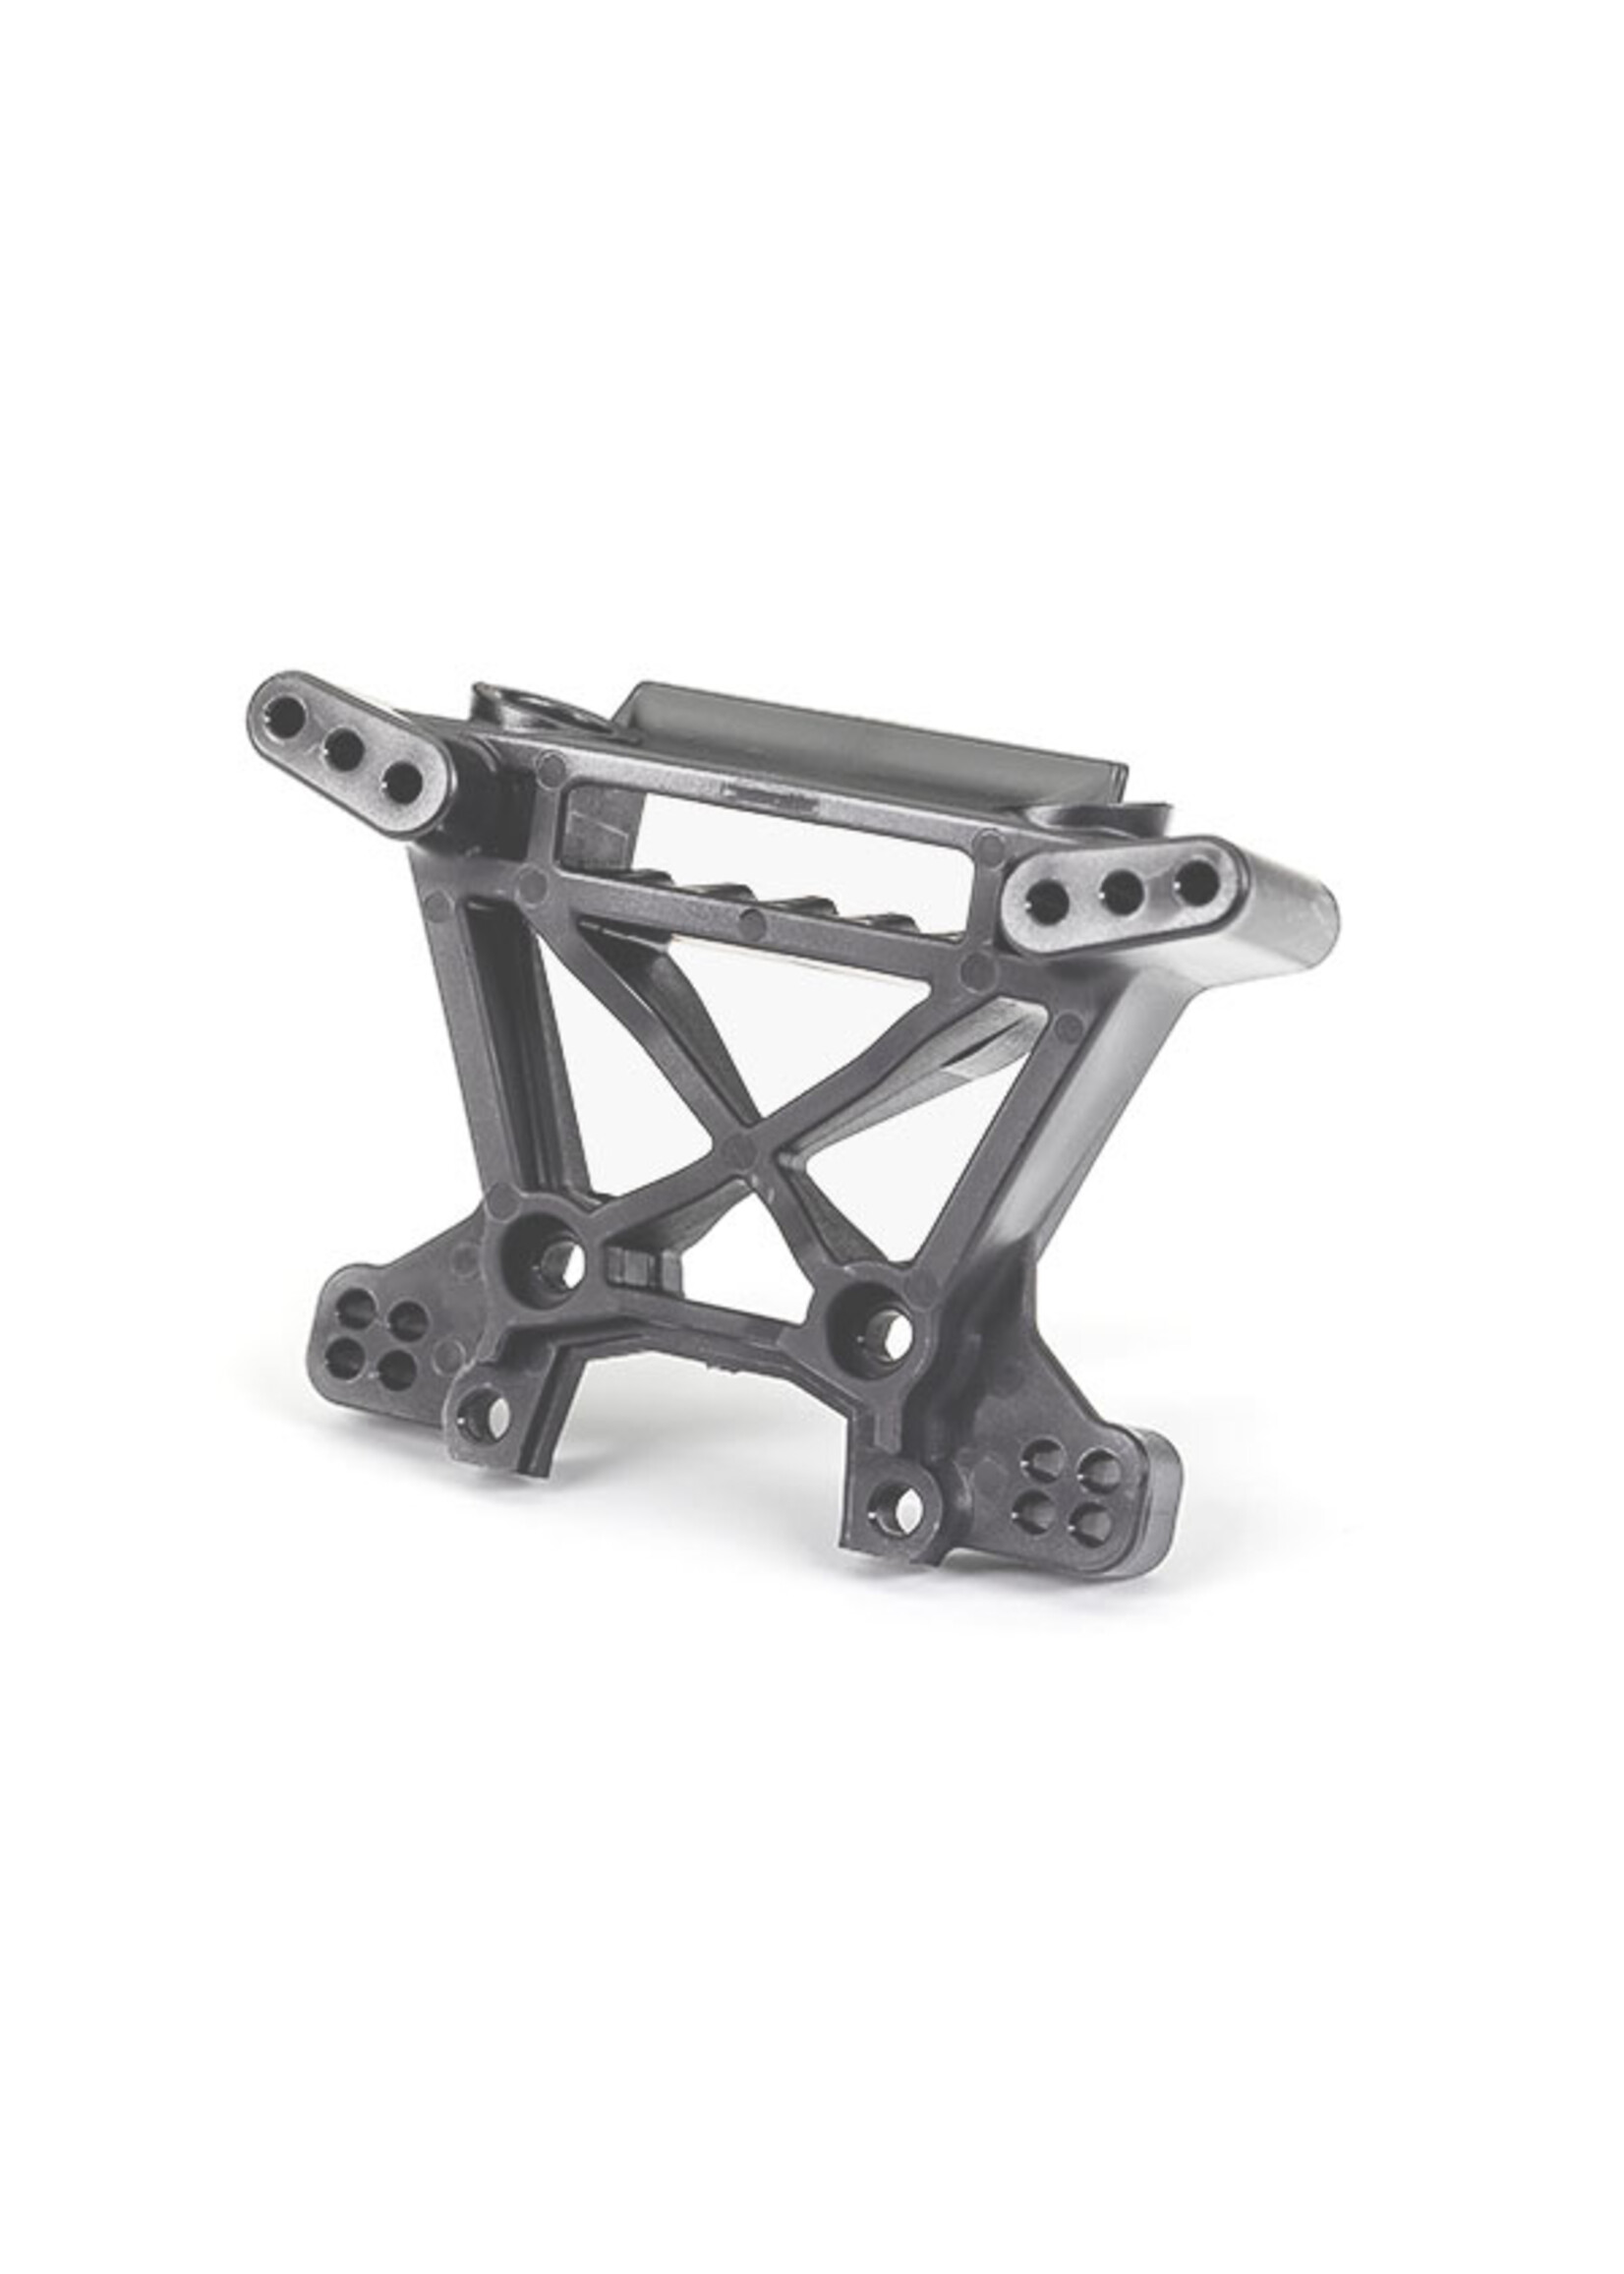 Traxxas 9038-GRAY - Shock Tower, Front - Gray